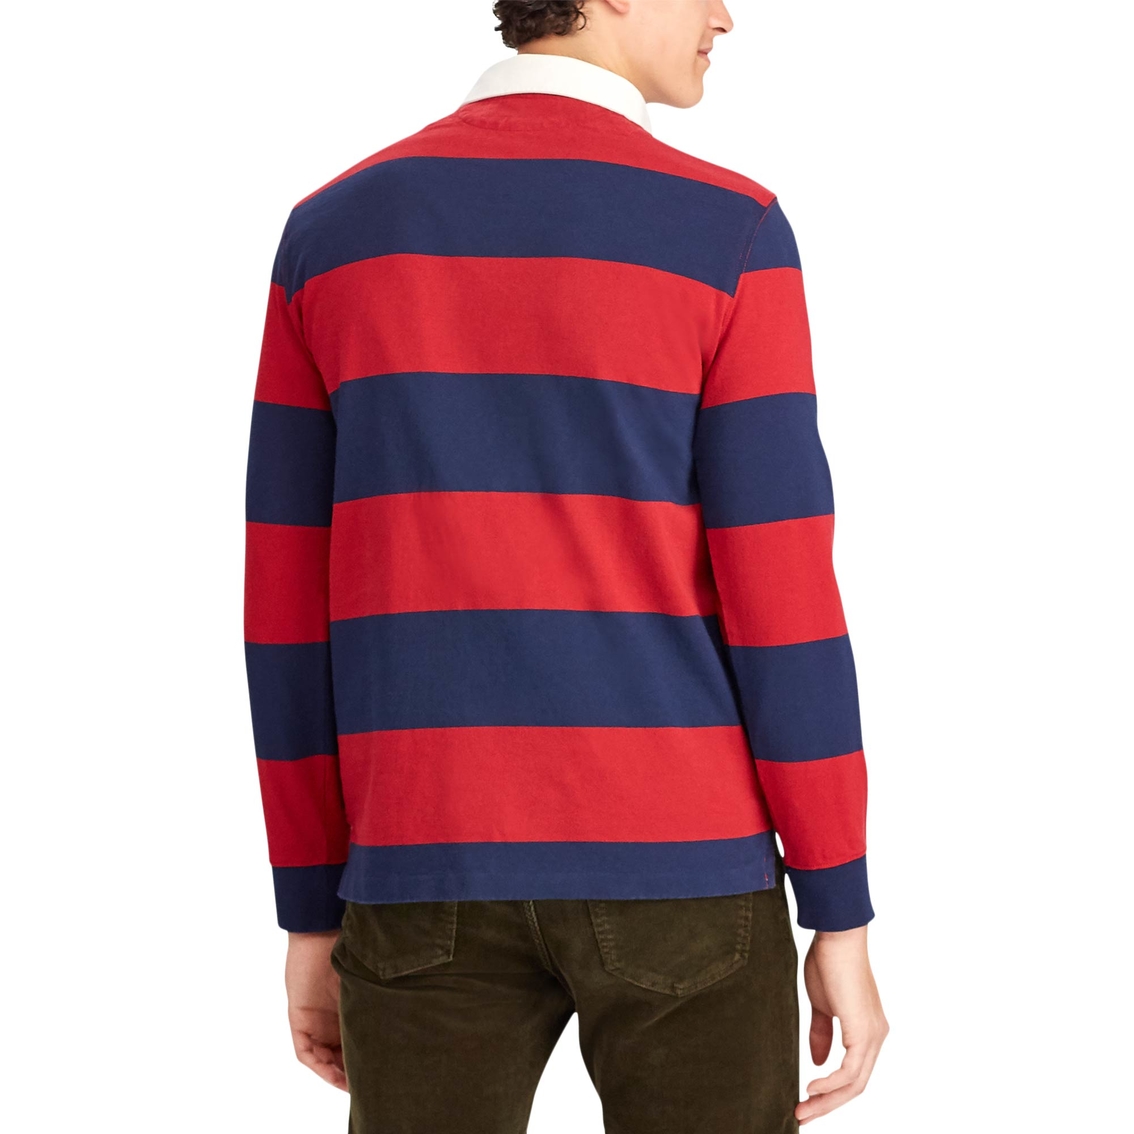 Polo Ralph Lauren The Iconic Rugby Shirt | Shirts | Clothing 